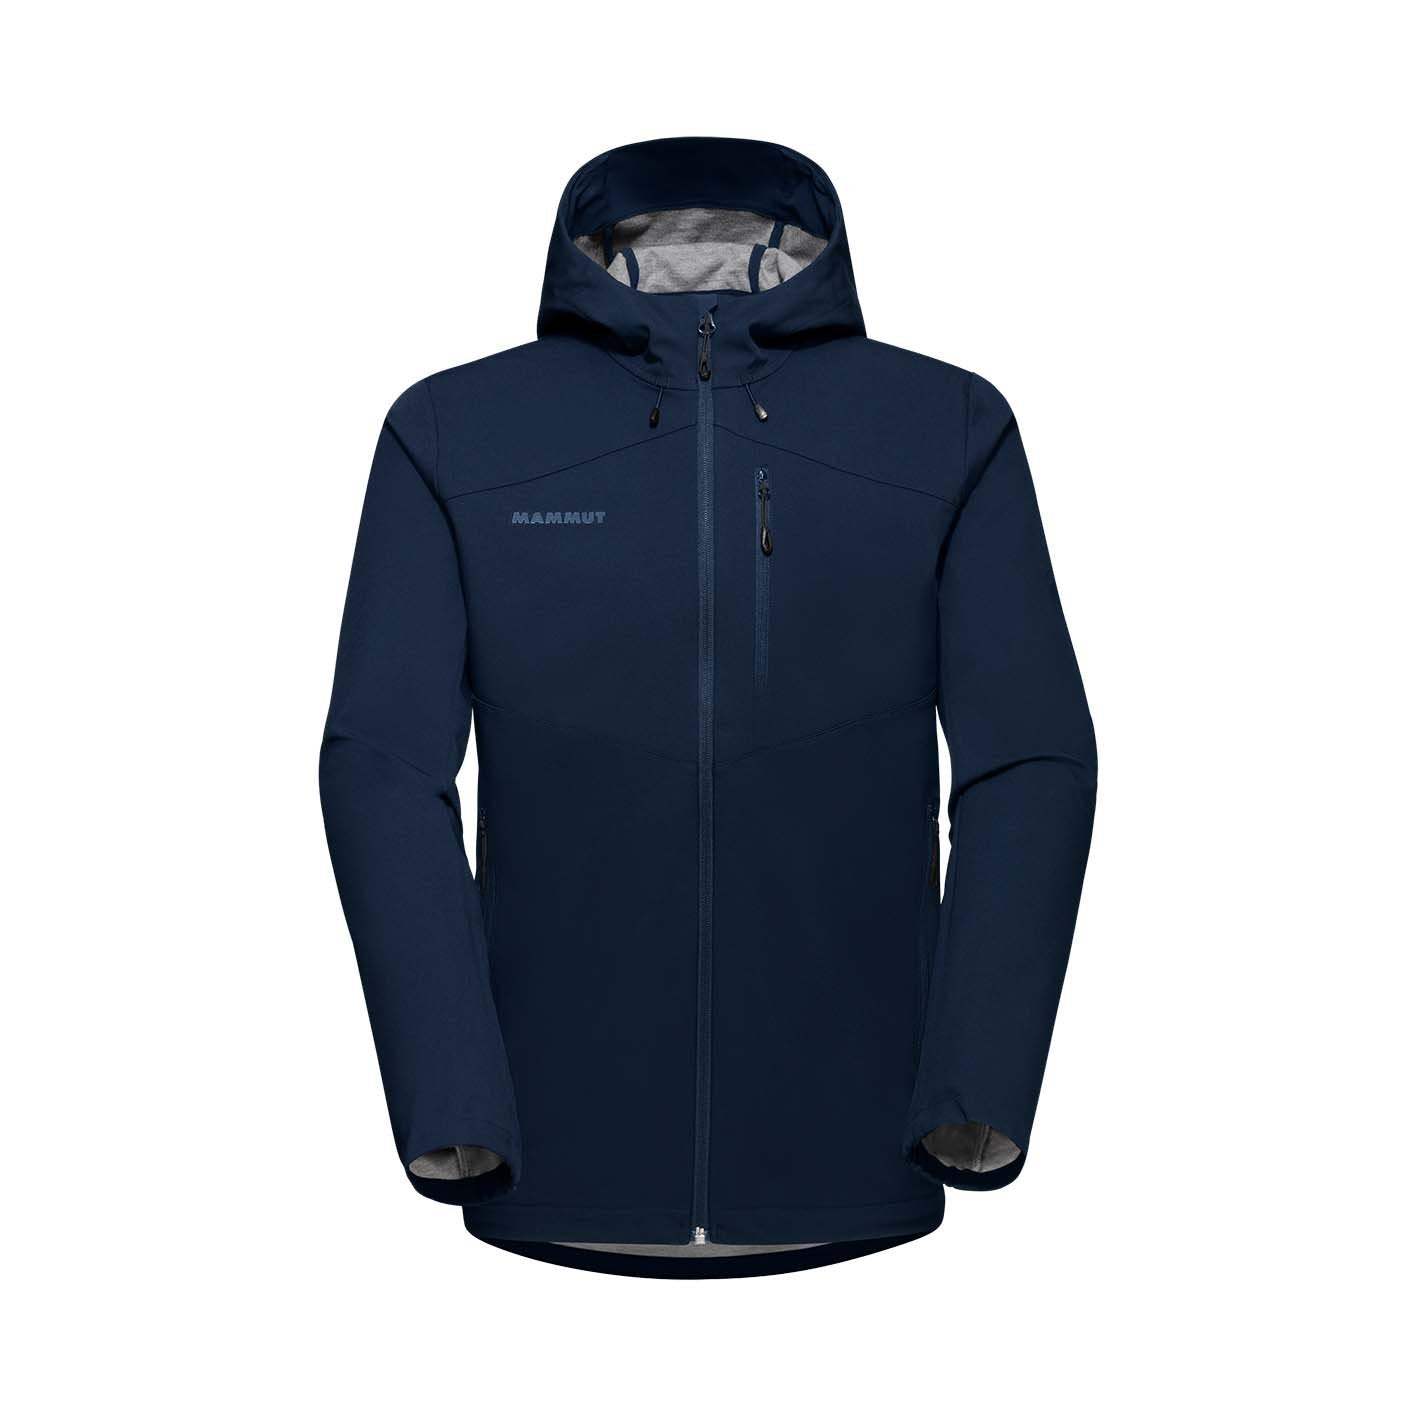 Men's Corporate Softshell Hooded Jacket by Mammut - The Luxury Promotional Gifts Company Limited